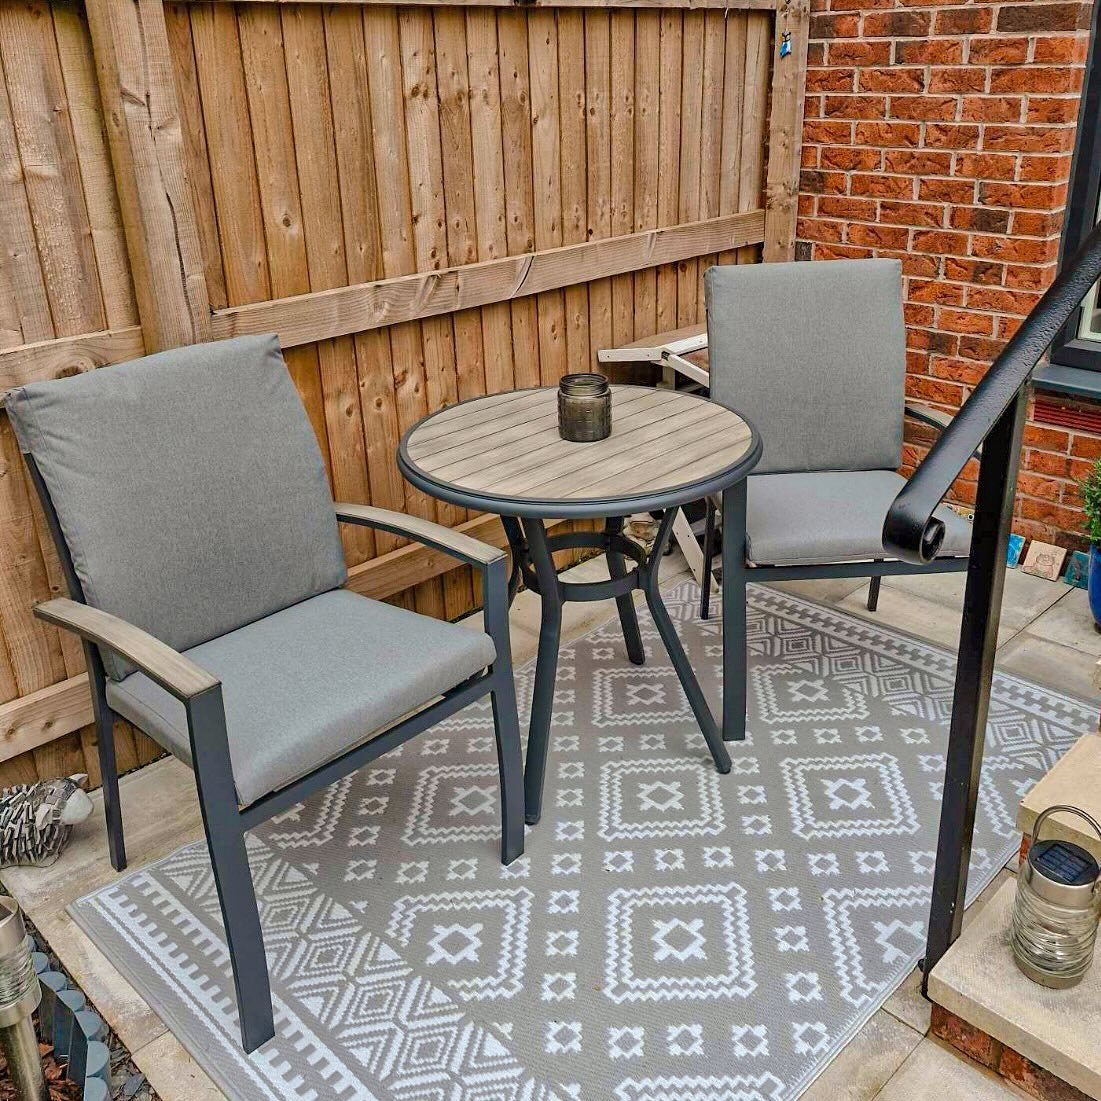 Look at this Turin bistro set looking right at home in our customer&rsquo;s beautiful garden! 📸

We&rsquo;re loving how Siobhan, has styled her new furniture. 

Our garden sets are selling fast, pop in and see us soon to avoid missing out. 

#thepla